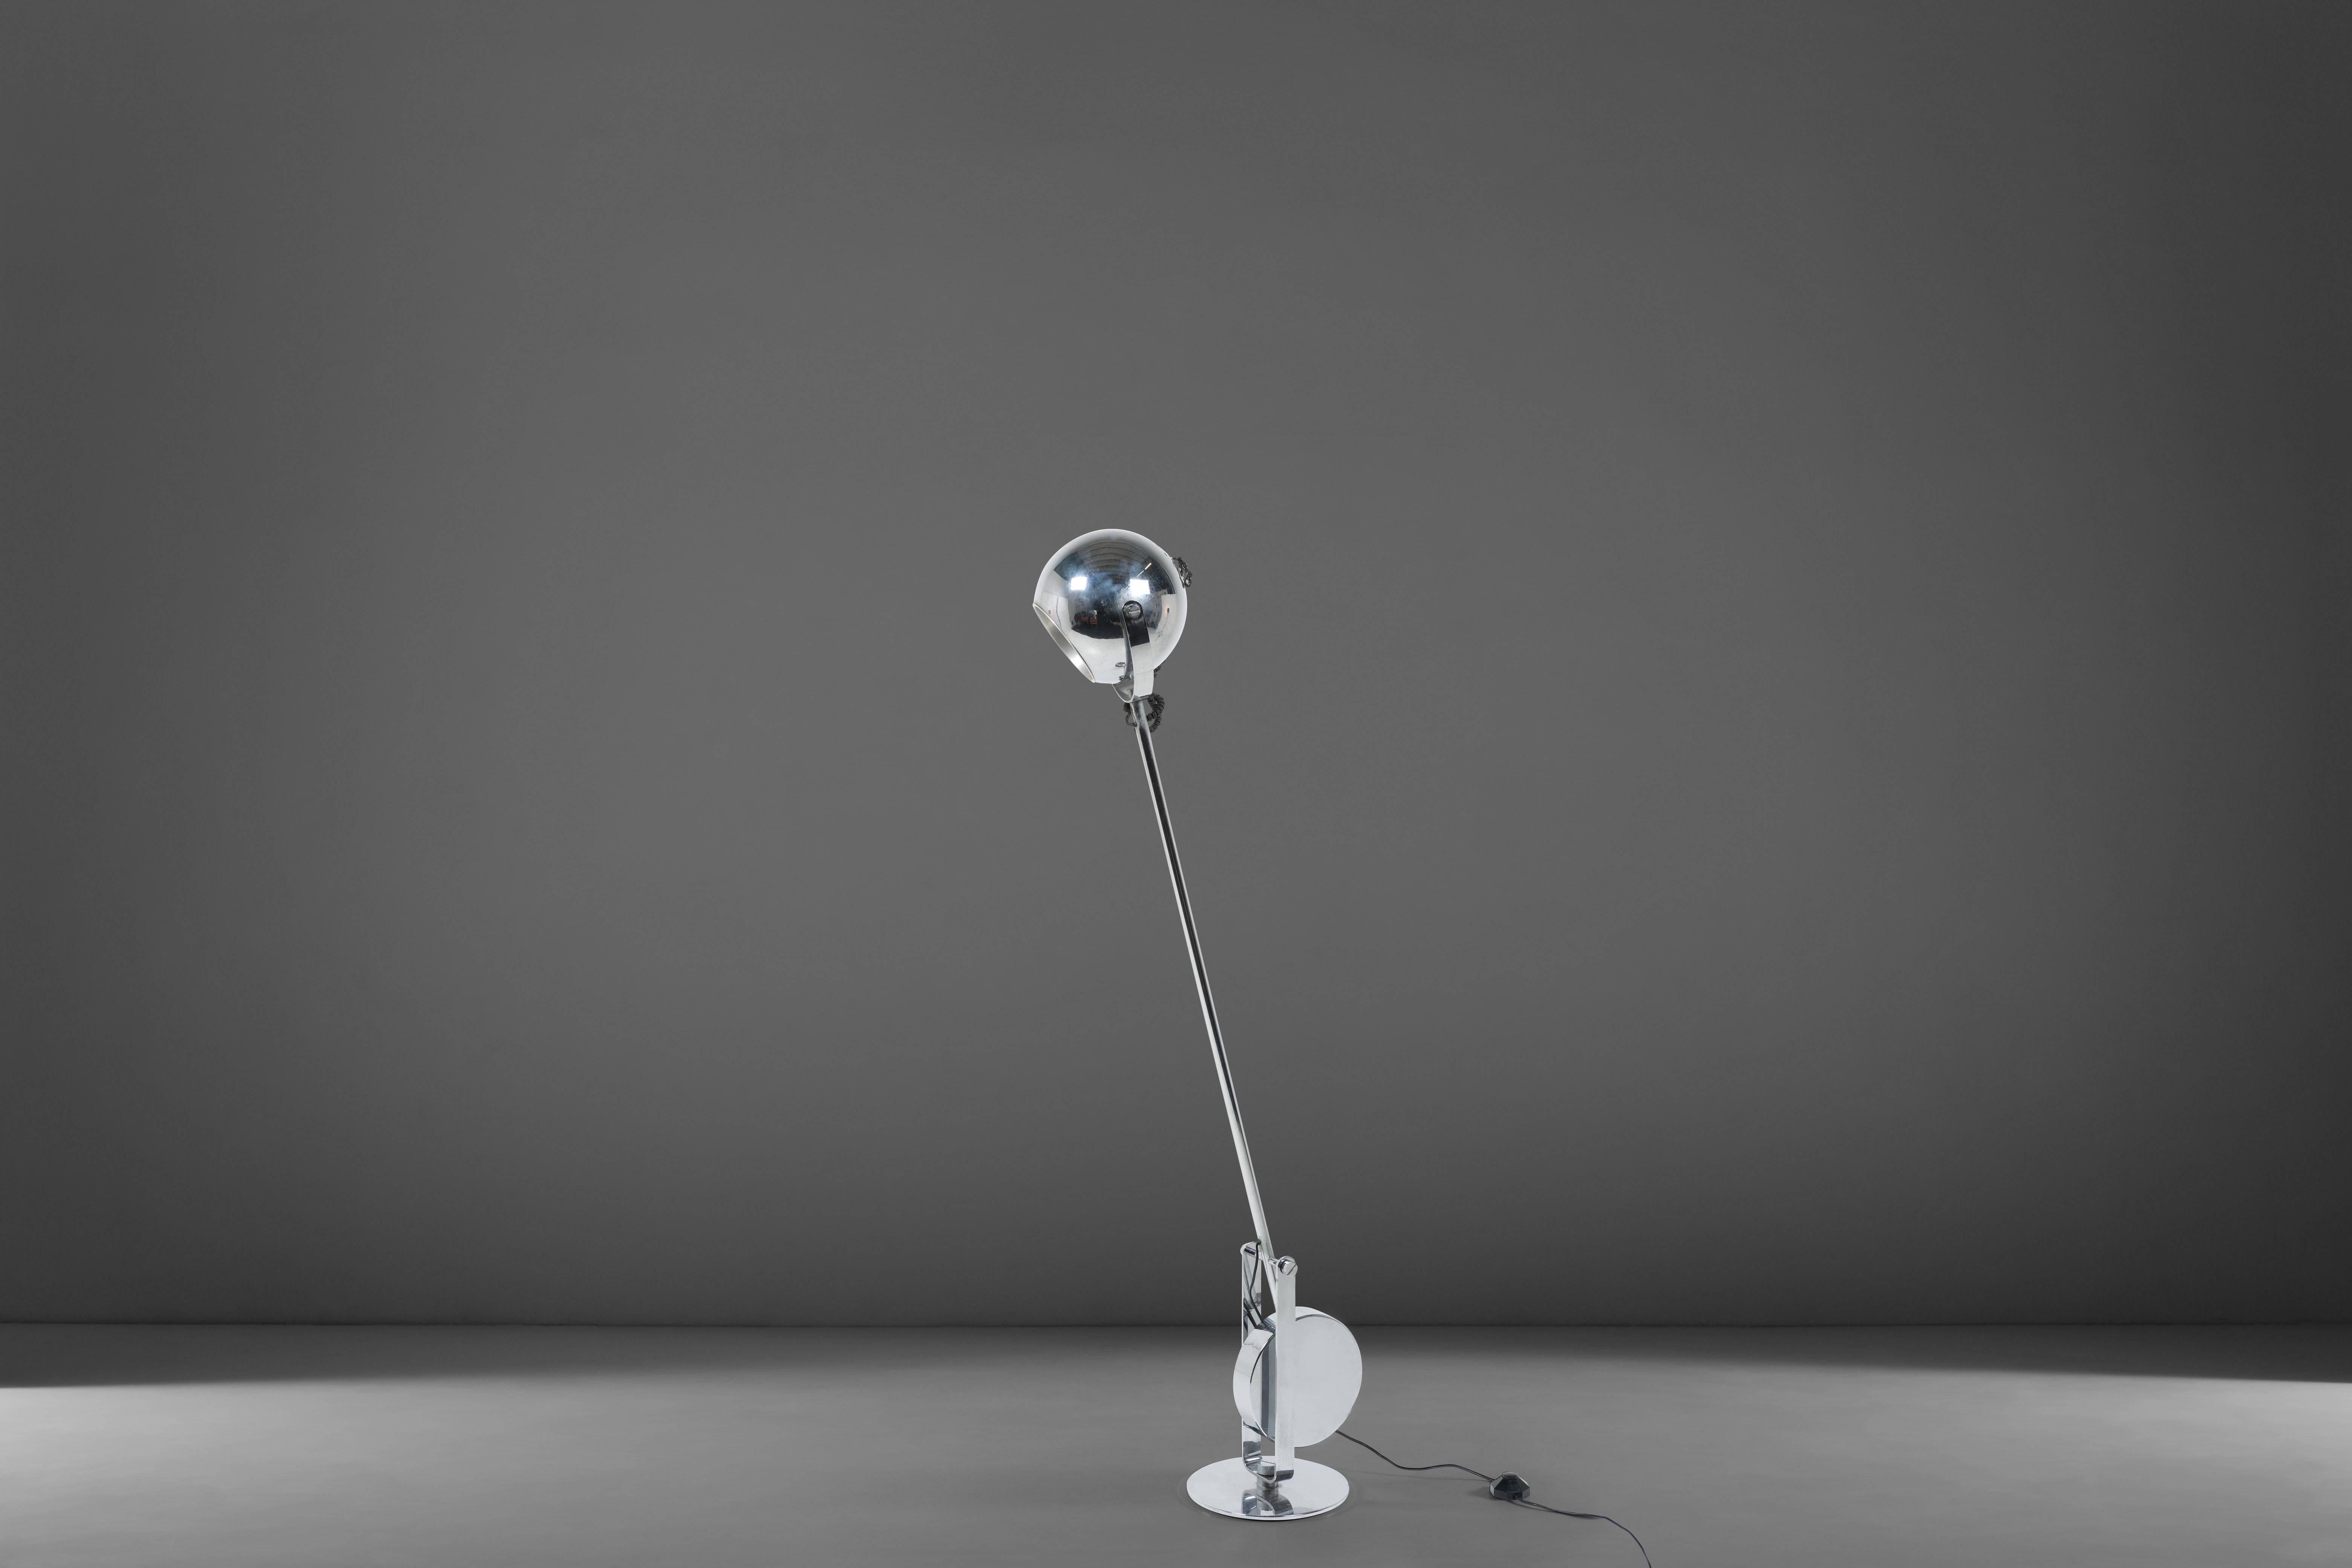 Mid-Century Modern Paolo Tilche S3 Floor Lamp in Chrome-Plated Metal for Sirrah, Italy, 1972